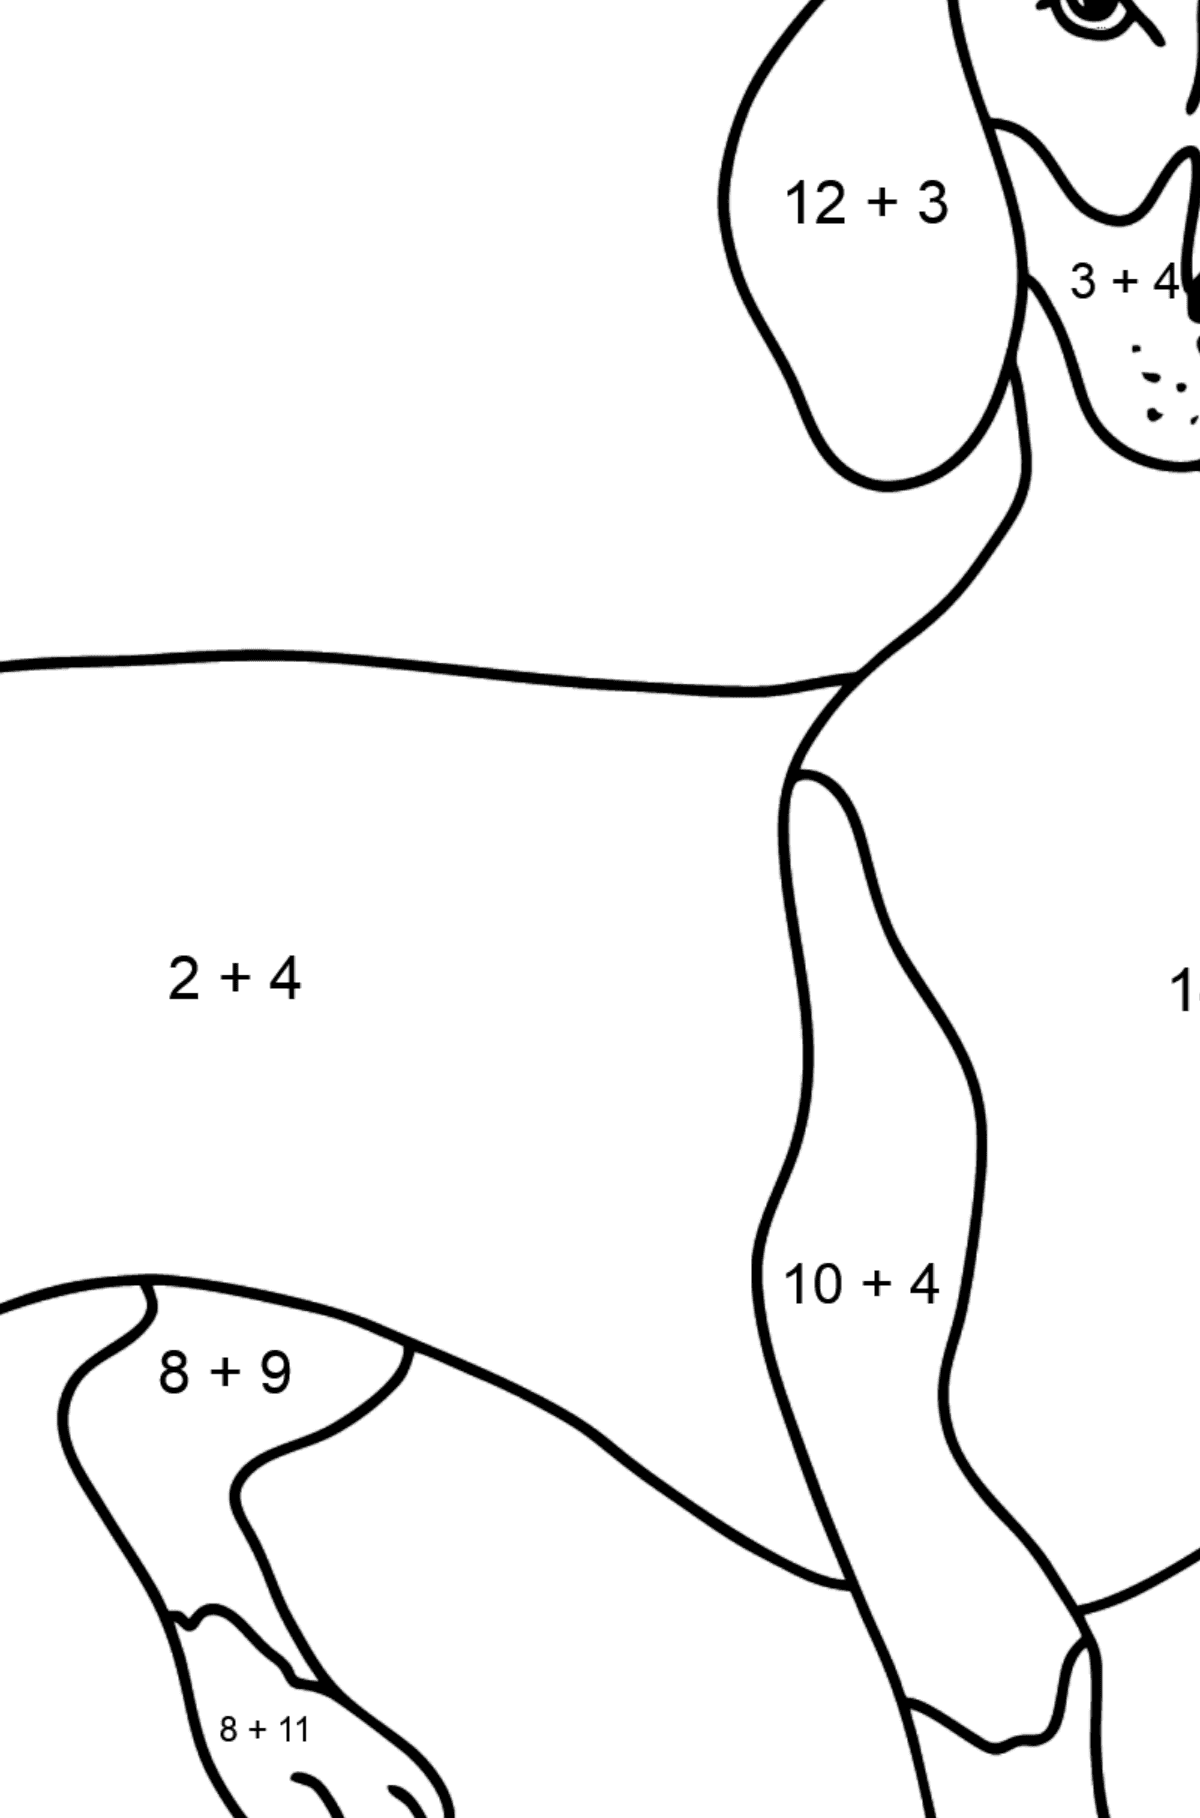 Dachshund coloring page - Math Coloring - Addition for Kids